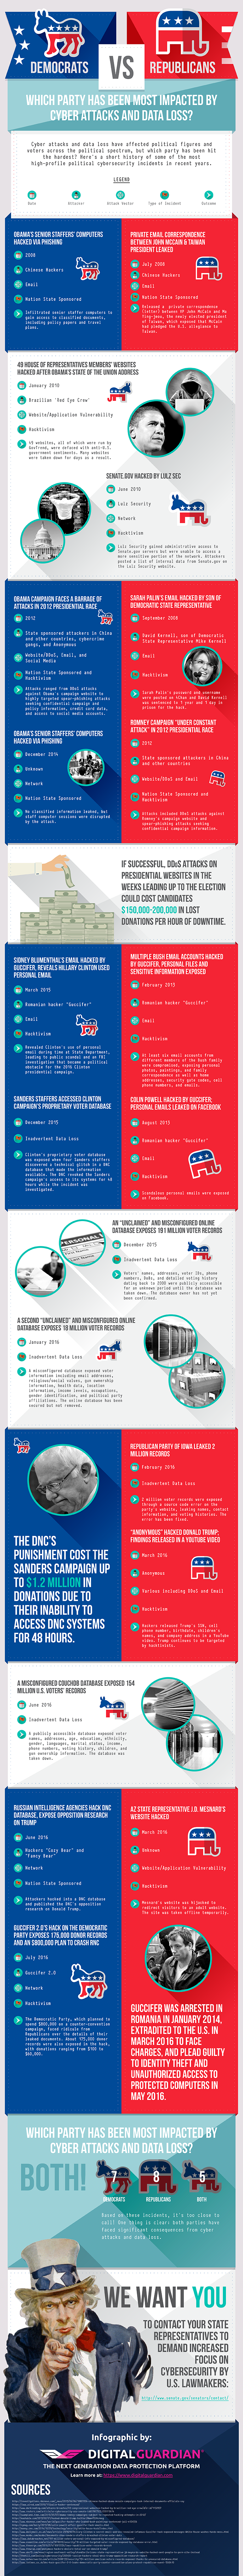 Political Hacks and Data Loss Infographic